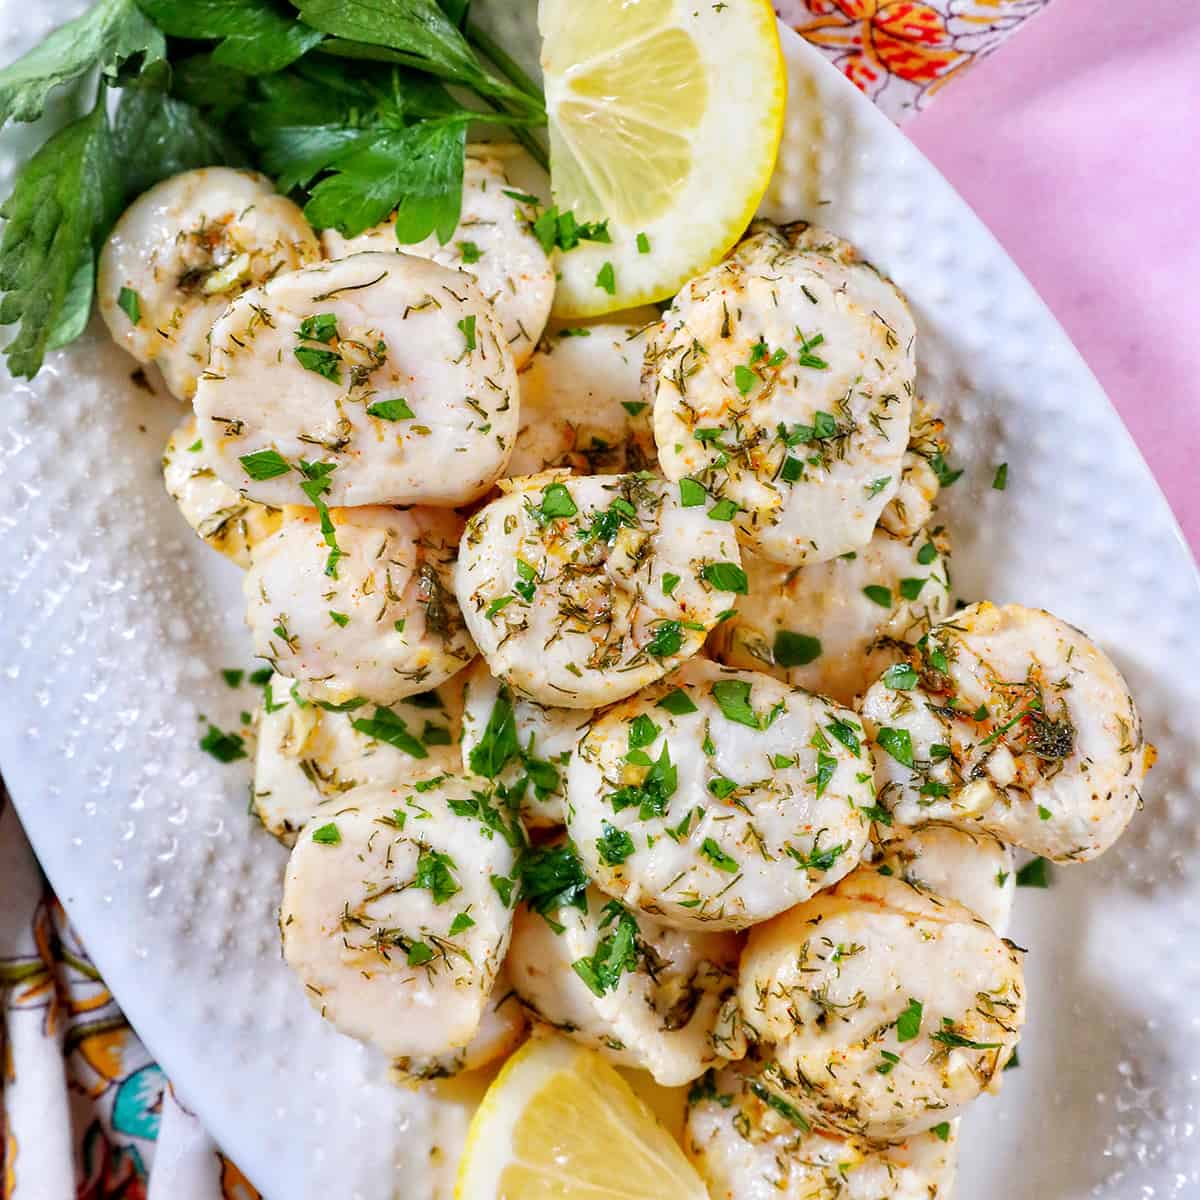 several cooked scallops topped with herbs and garlic, with lemon slices and parsley, on a white plate.